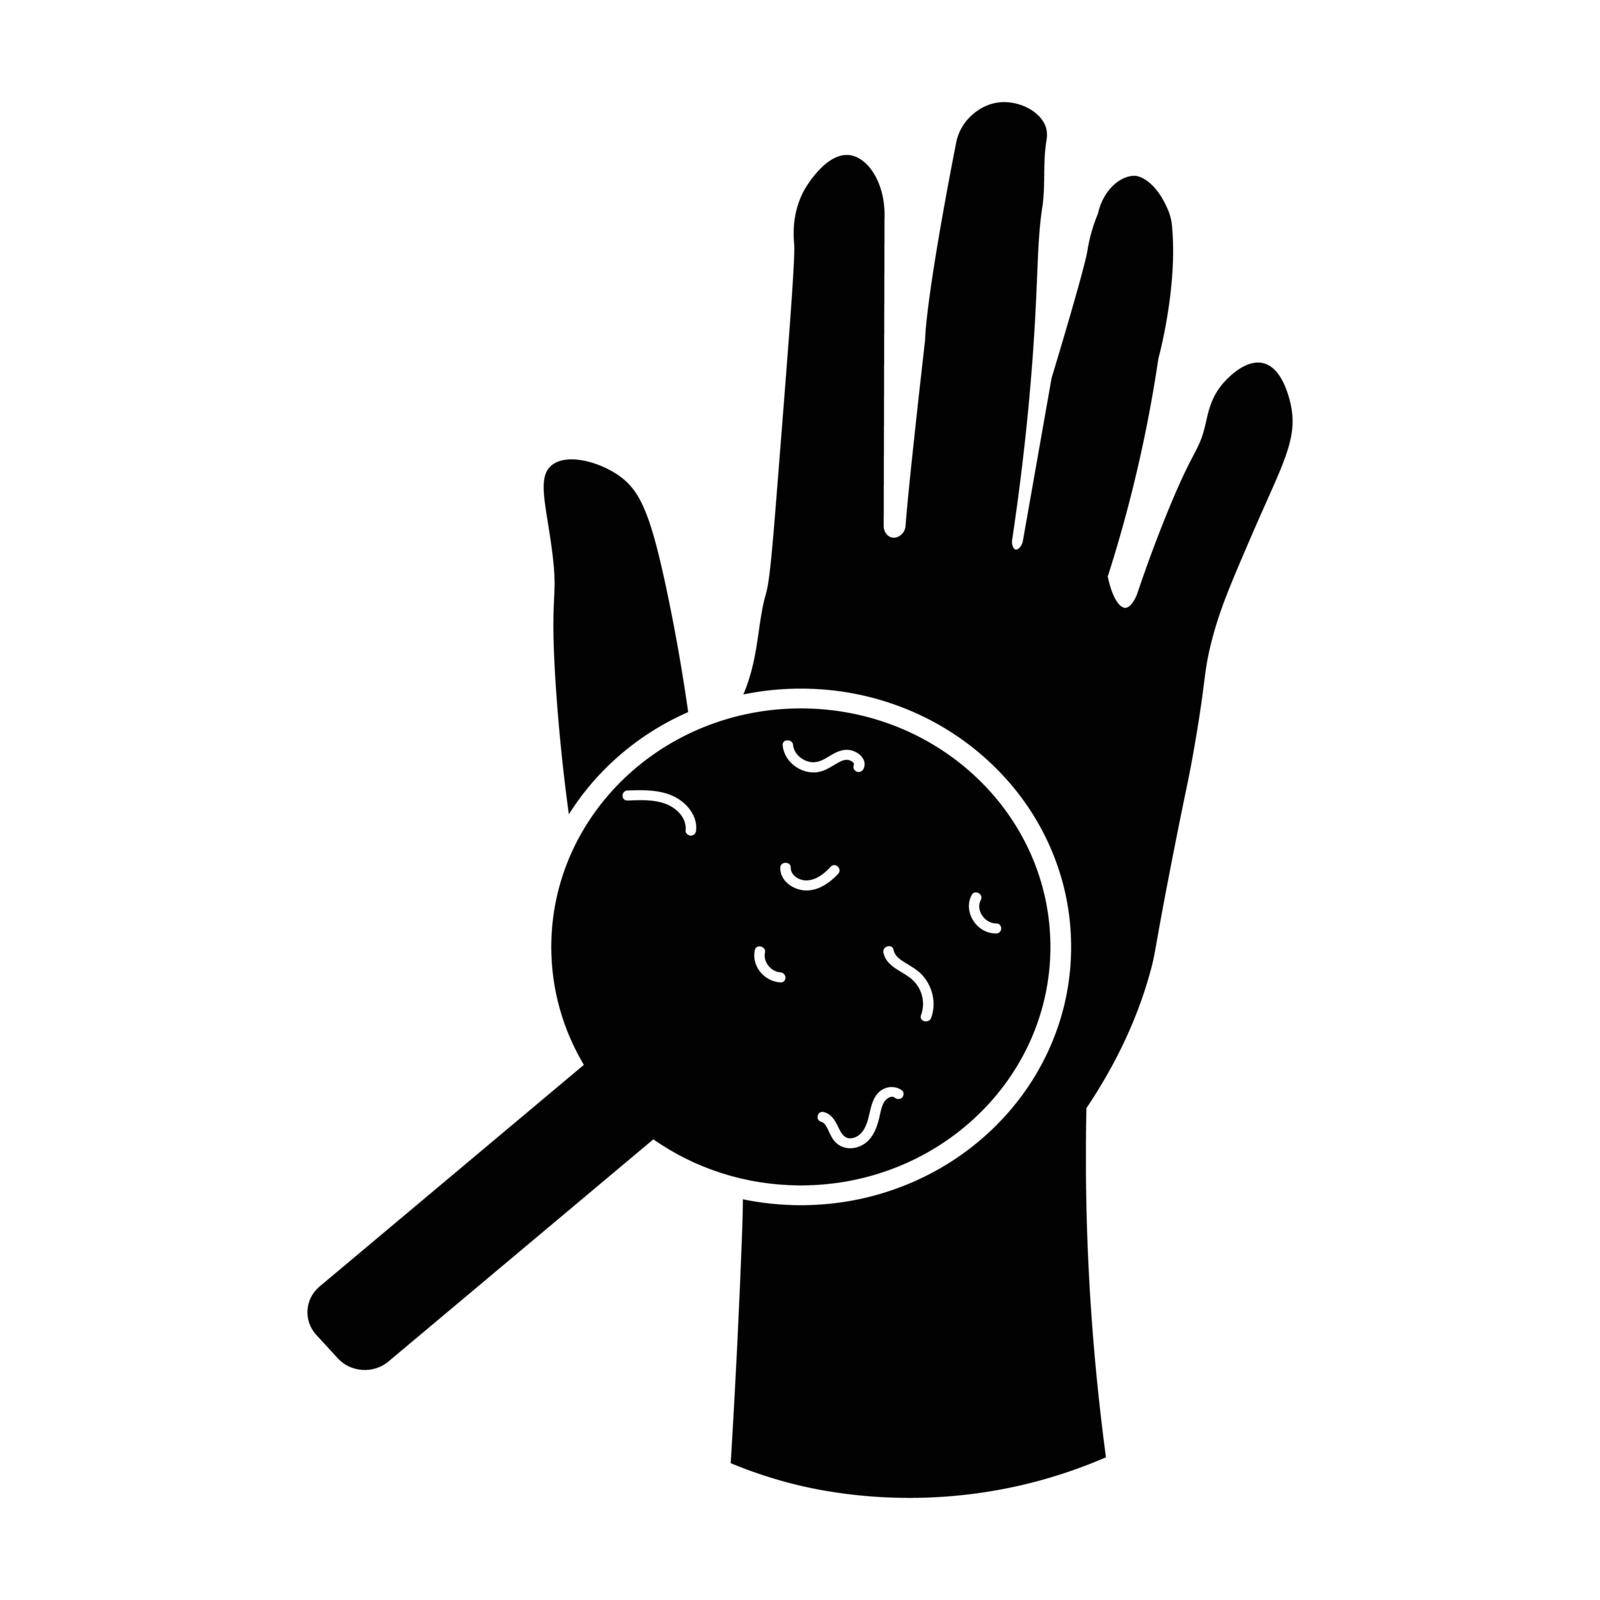 Germs Virus Bacteria on Hand Palm Using Magnifying Glass. Black and White EPS Vector